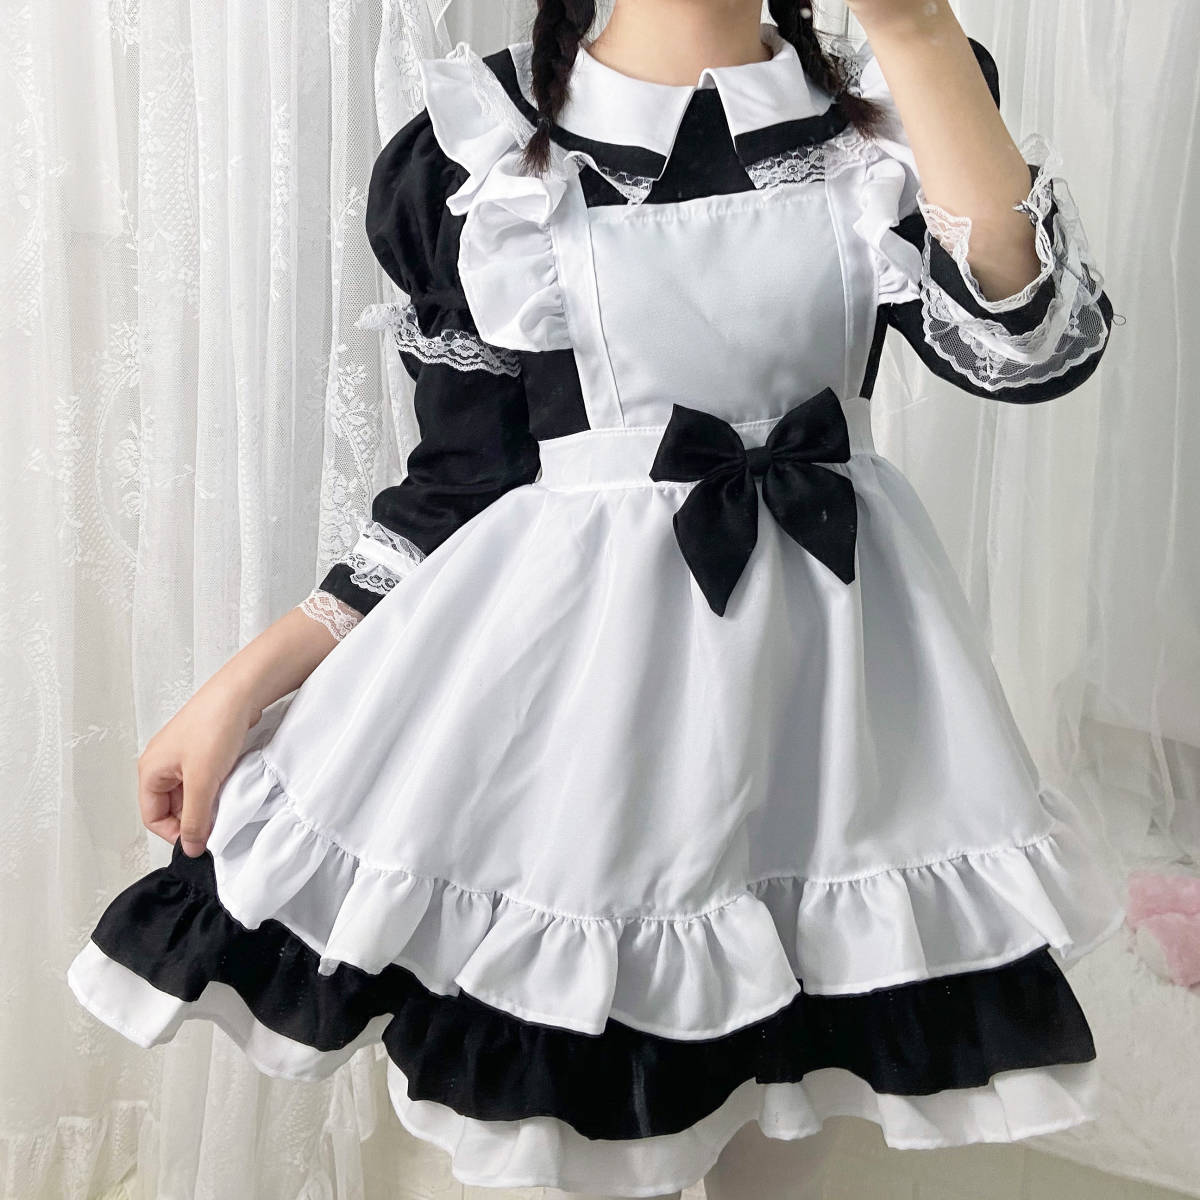  lady's made clothes Lolita culture festival lovely Halloween festival Event an educational institution festival costume play clothes 